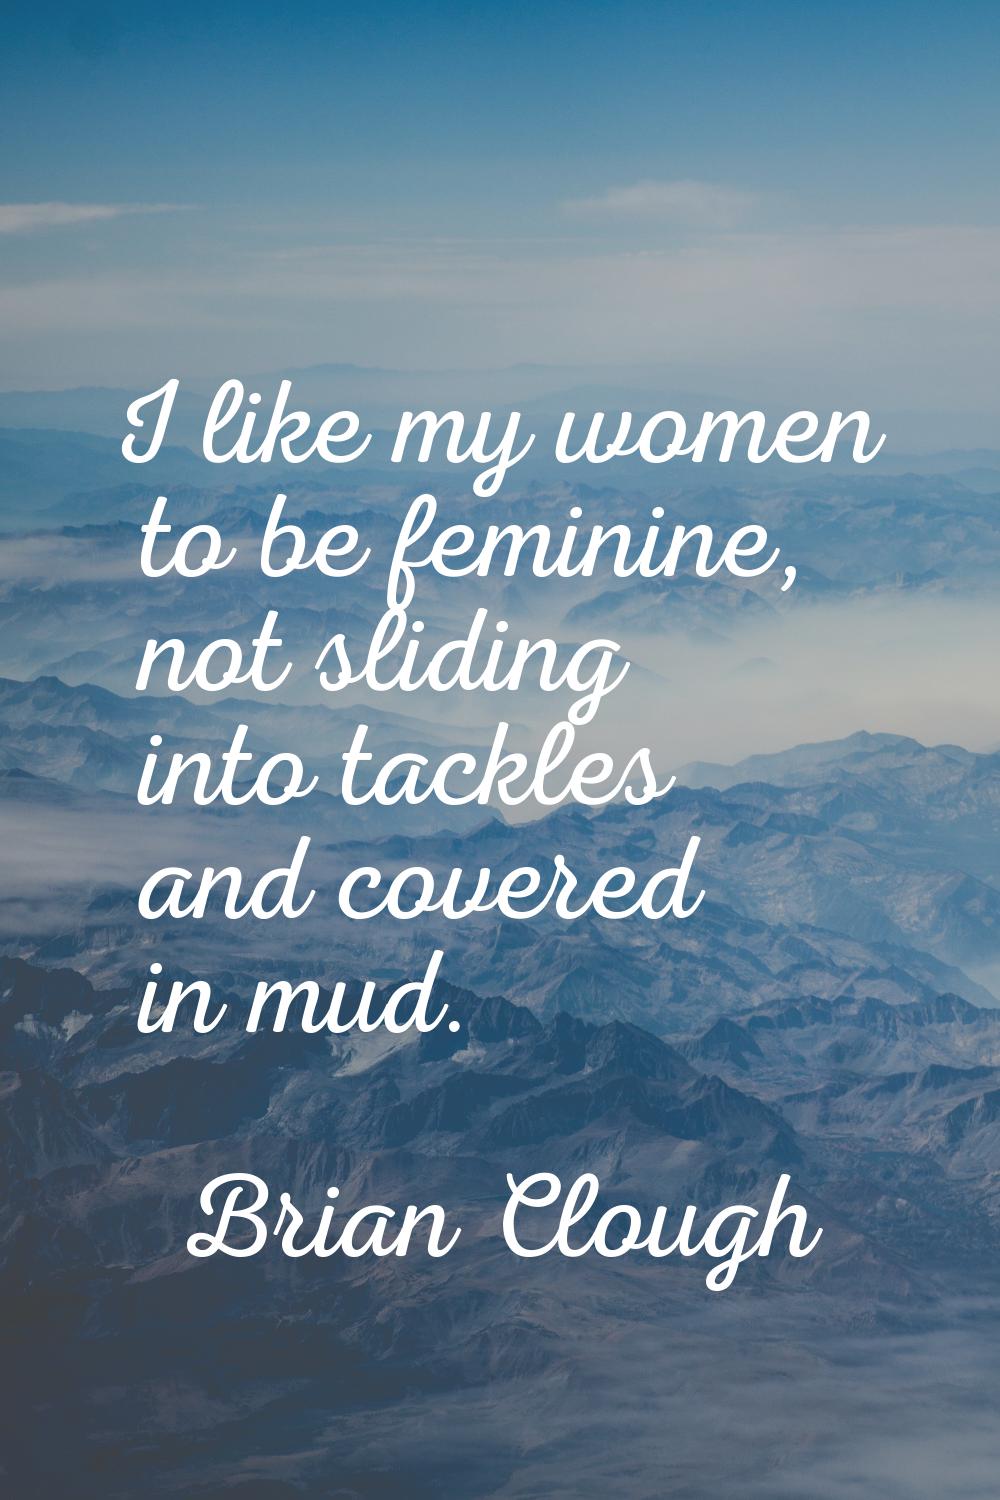 I like my women to be feminine, not sliding into tackles and covered in mud.